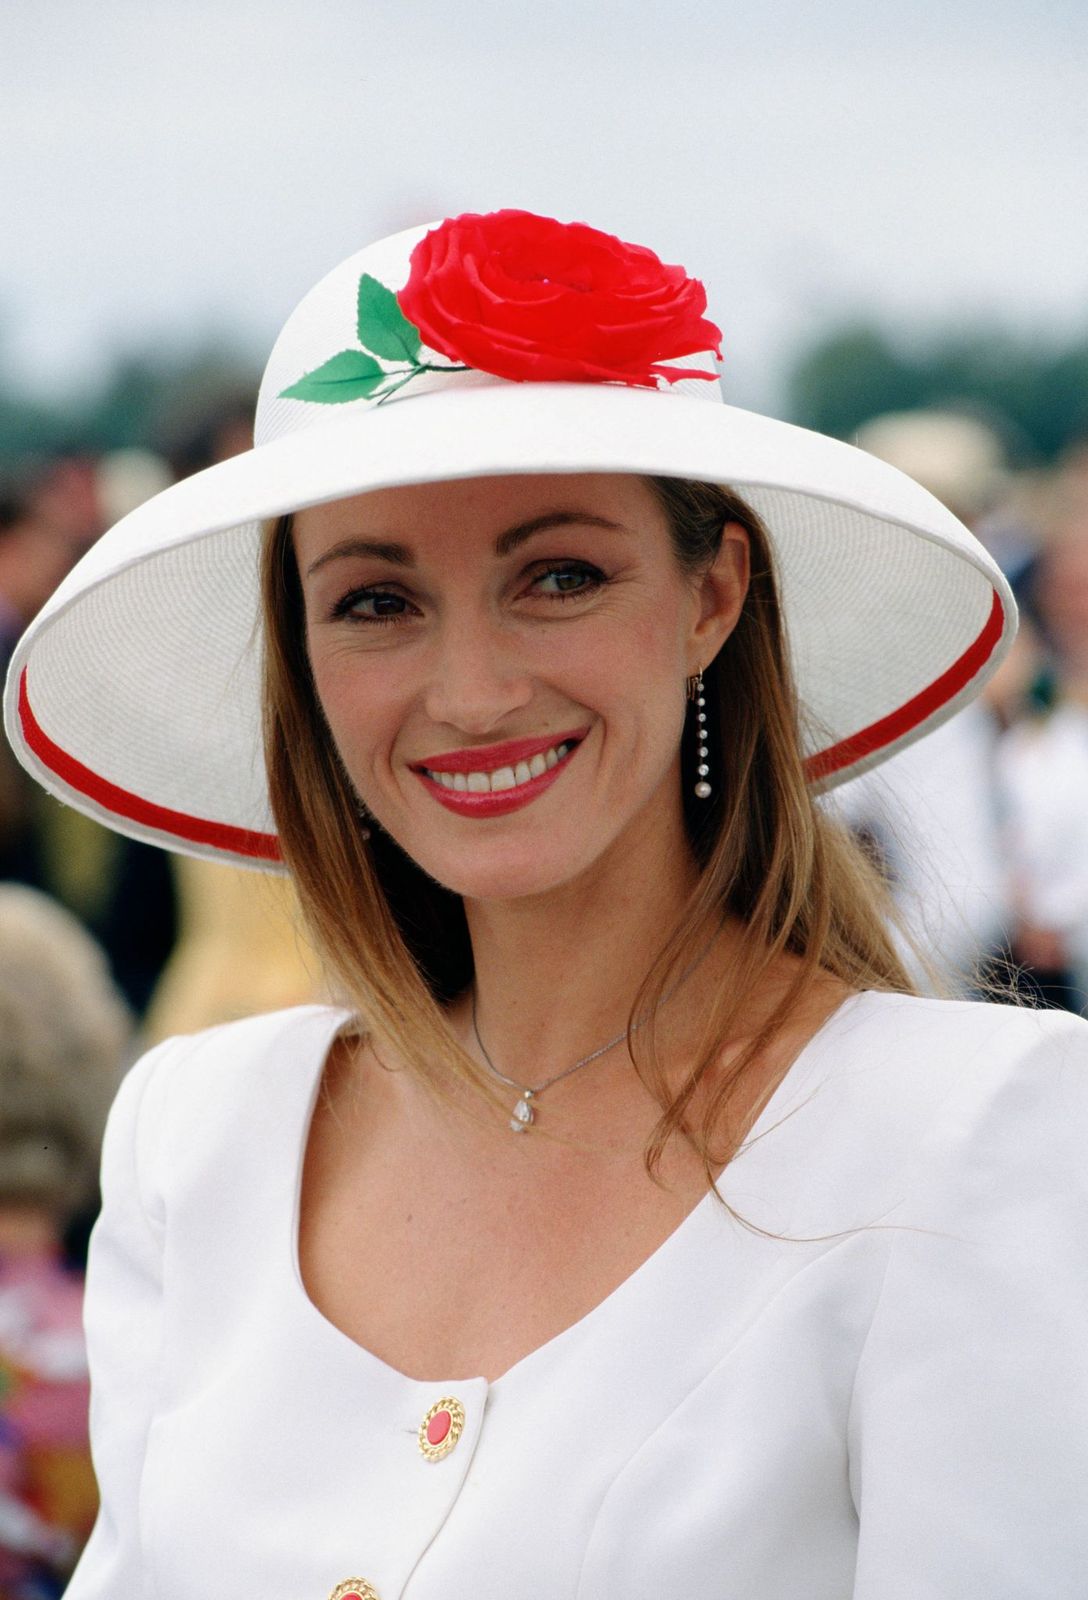 Actress Jane Seymour at Cartier Polo Day, Windsor, Berkshire, UK on July 29, 1990 | Source: Getty Images